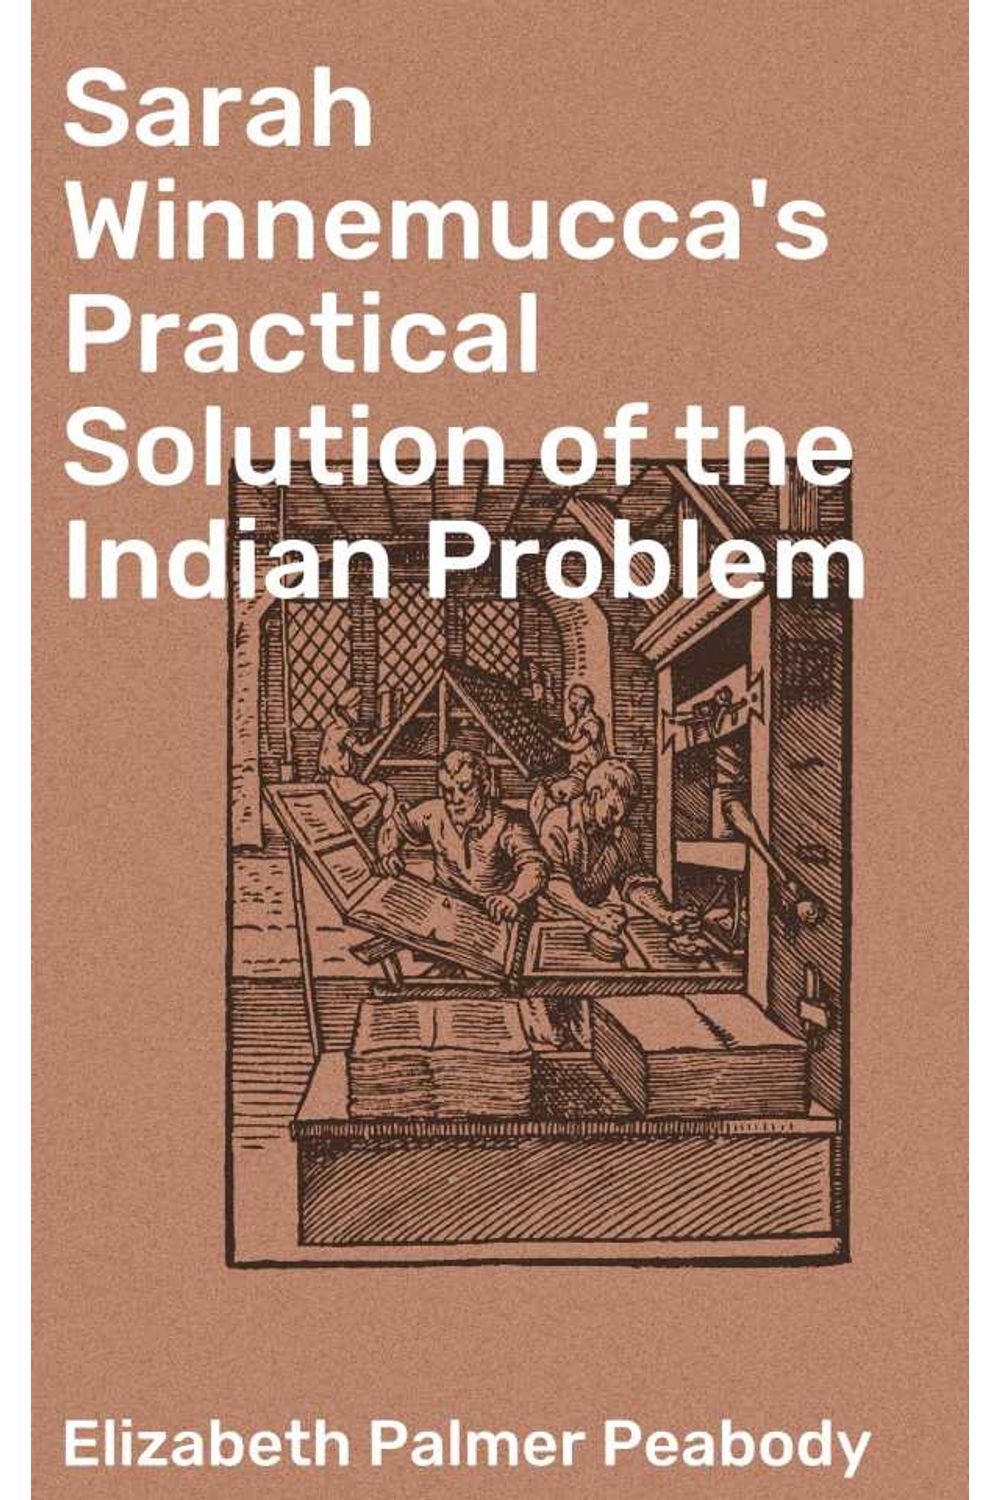 bw-sarah-winnemuccas-practical-solution-of-the-indian-problem-good-press-4064066093099